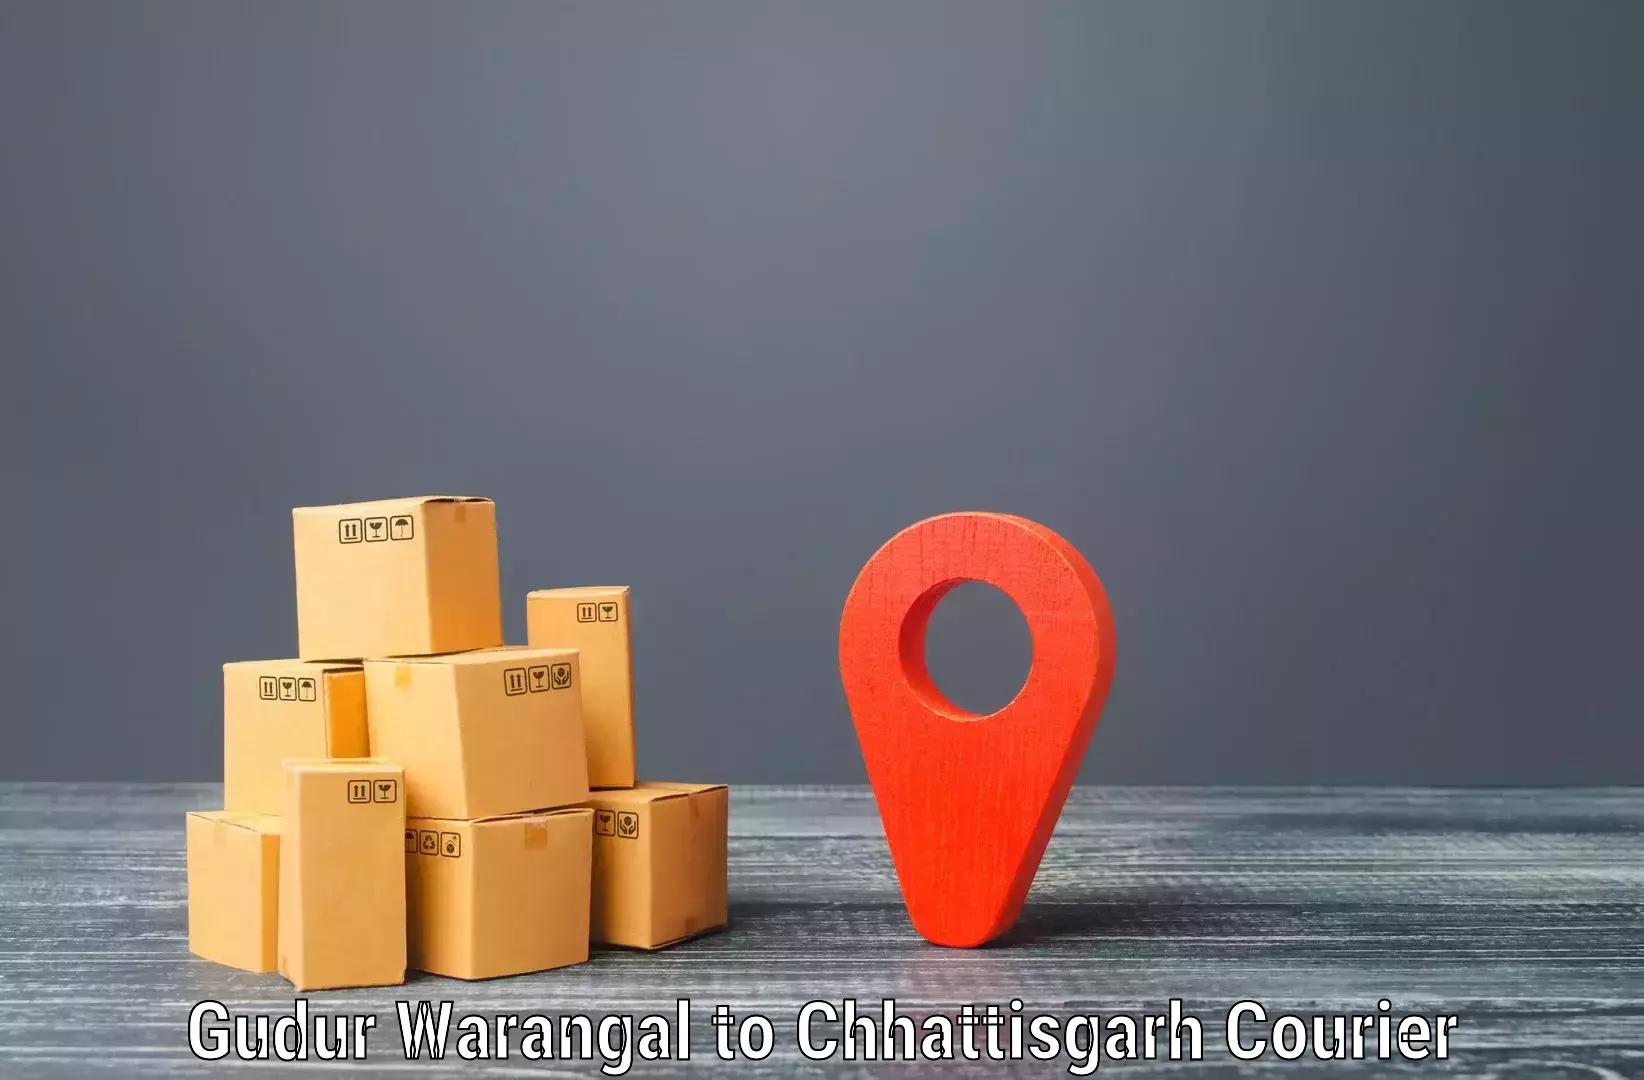 Personalized courier solutions Gudur Warangal to Mandhar